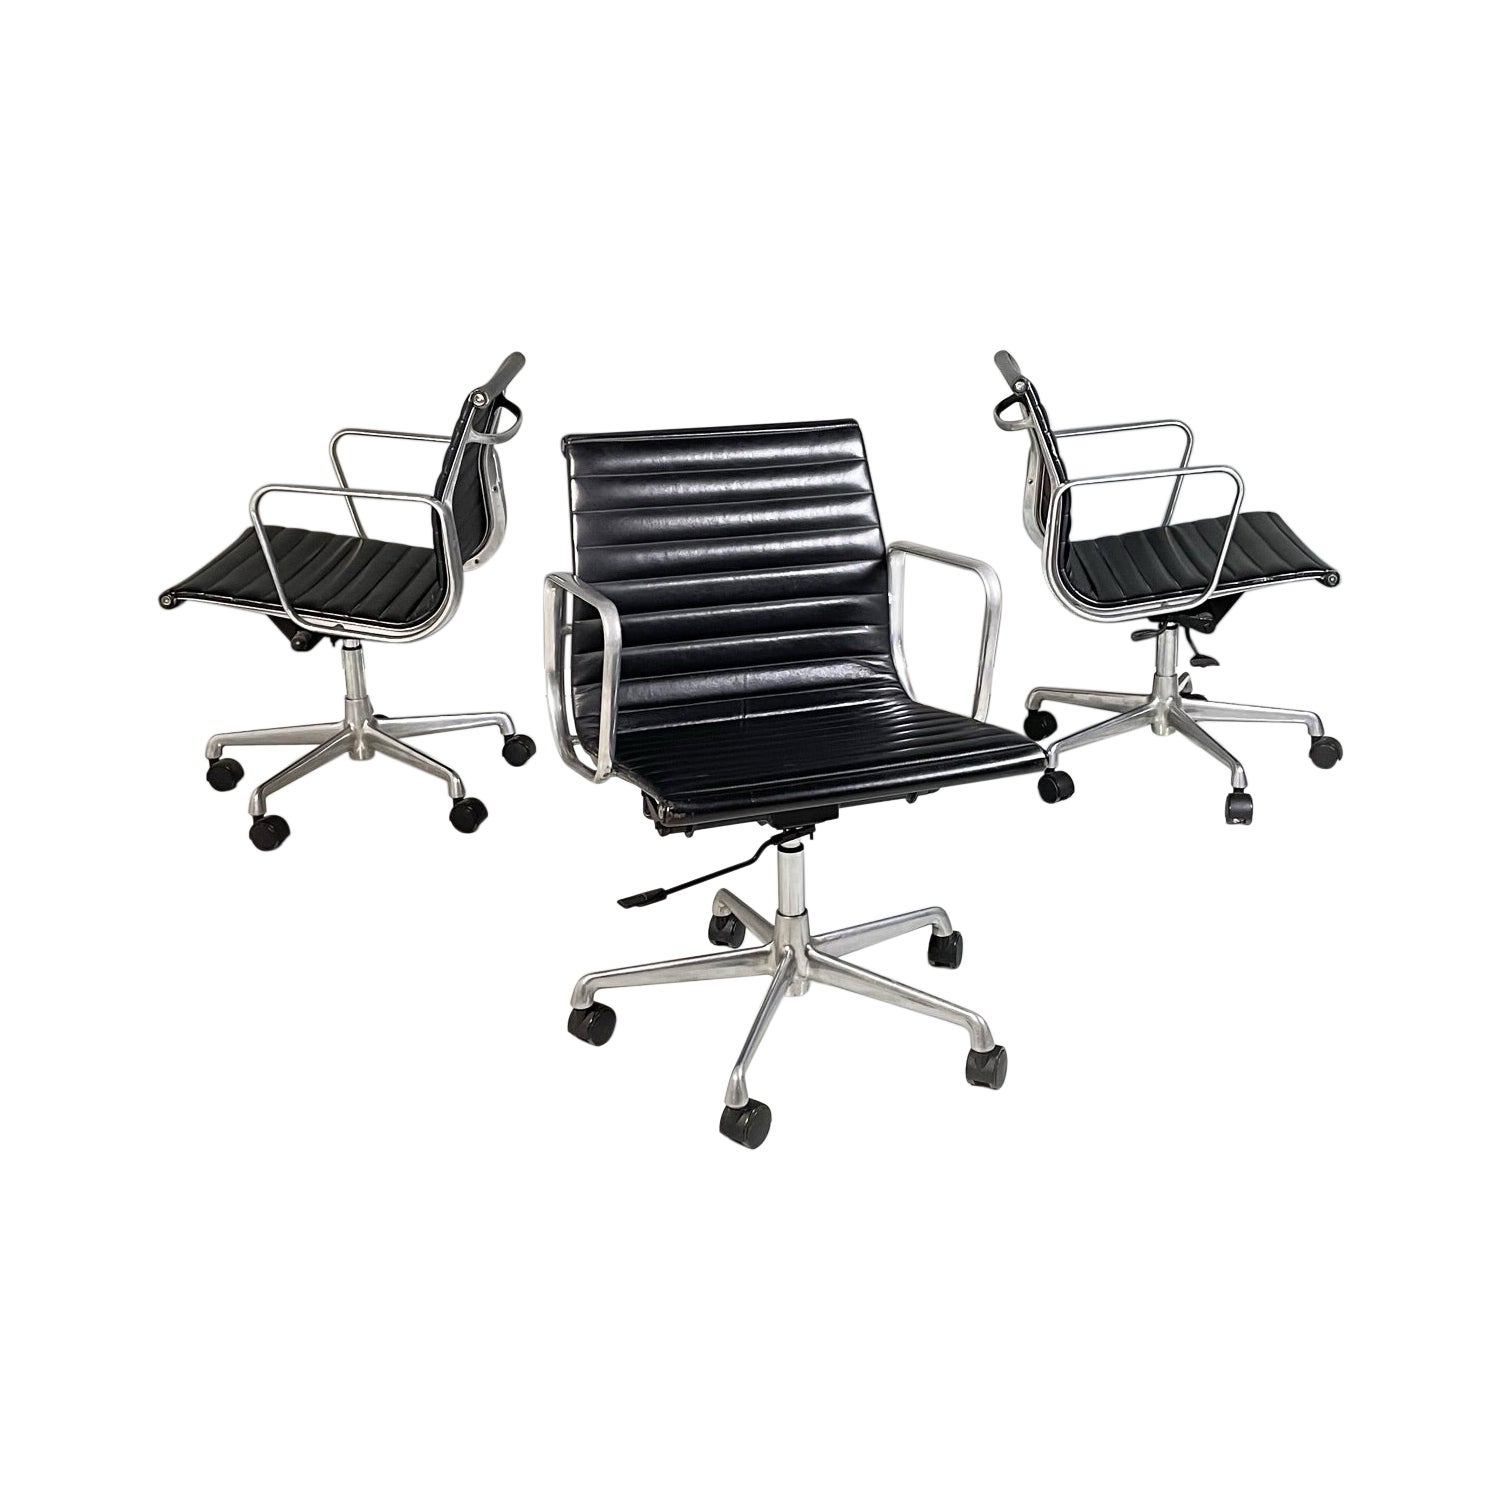 Italian Modern Office Chair Ea-117 Aluminum Group by Charles Ray Eames ICF, 1970